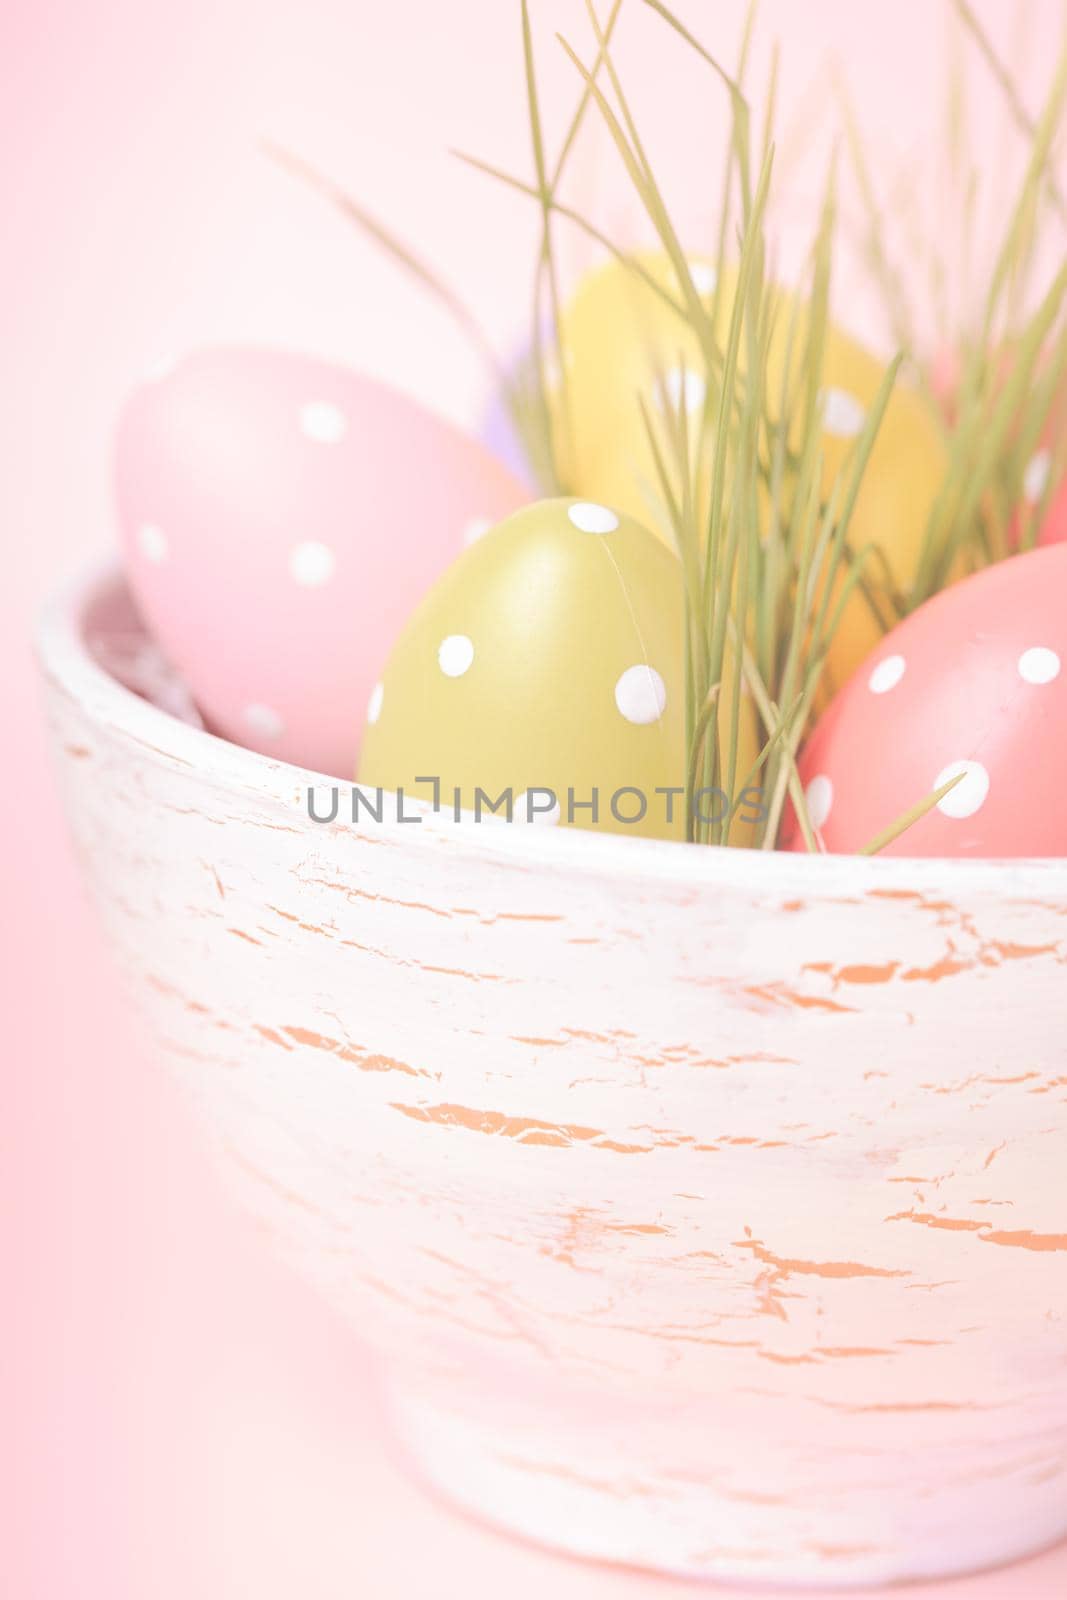 Decorative eggs in pot with grass over pink background. Easter decor.